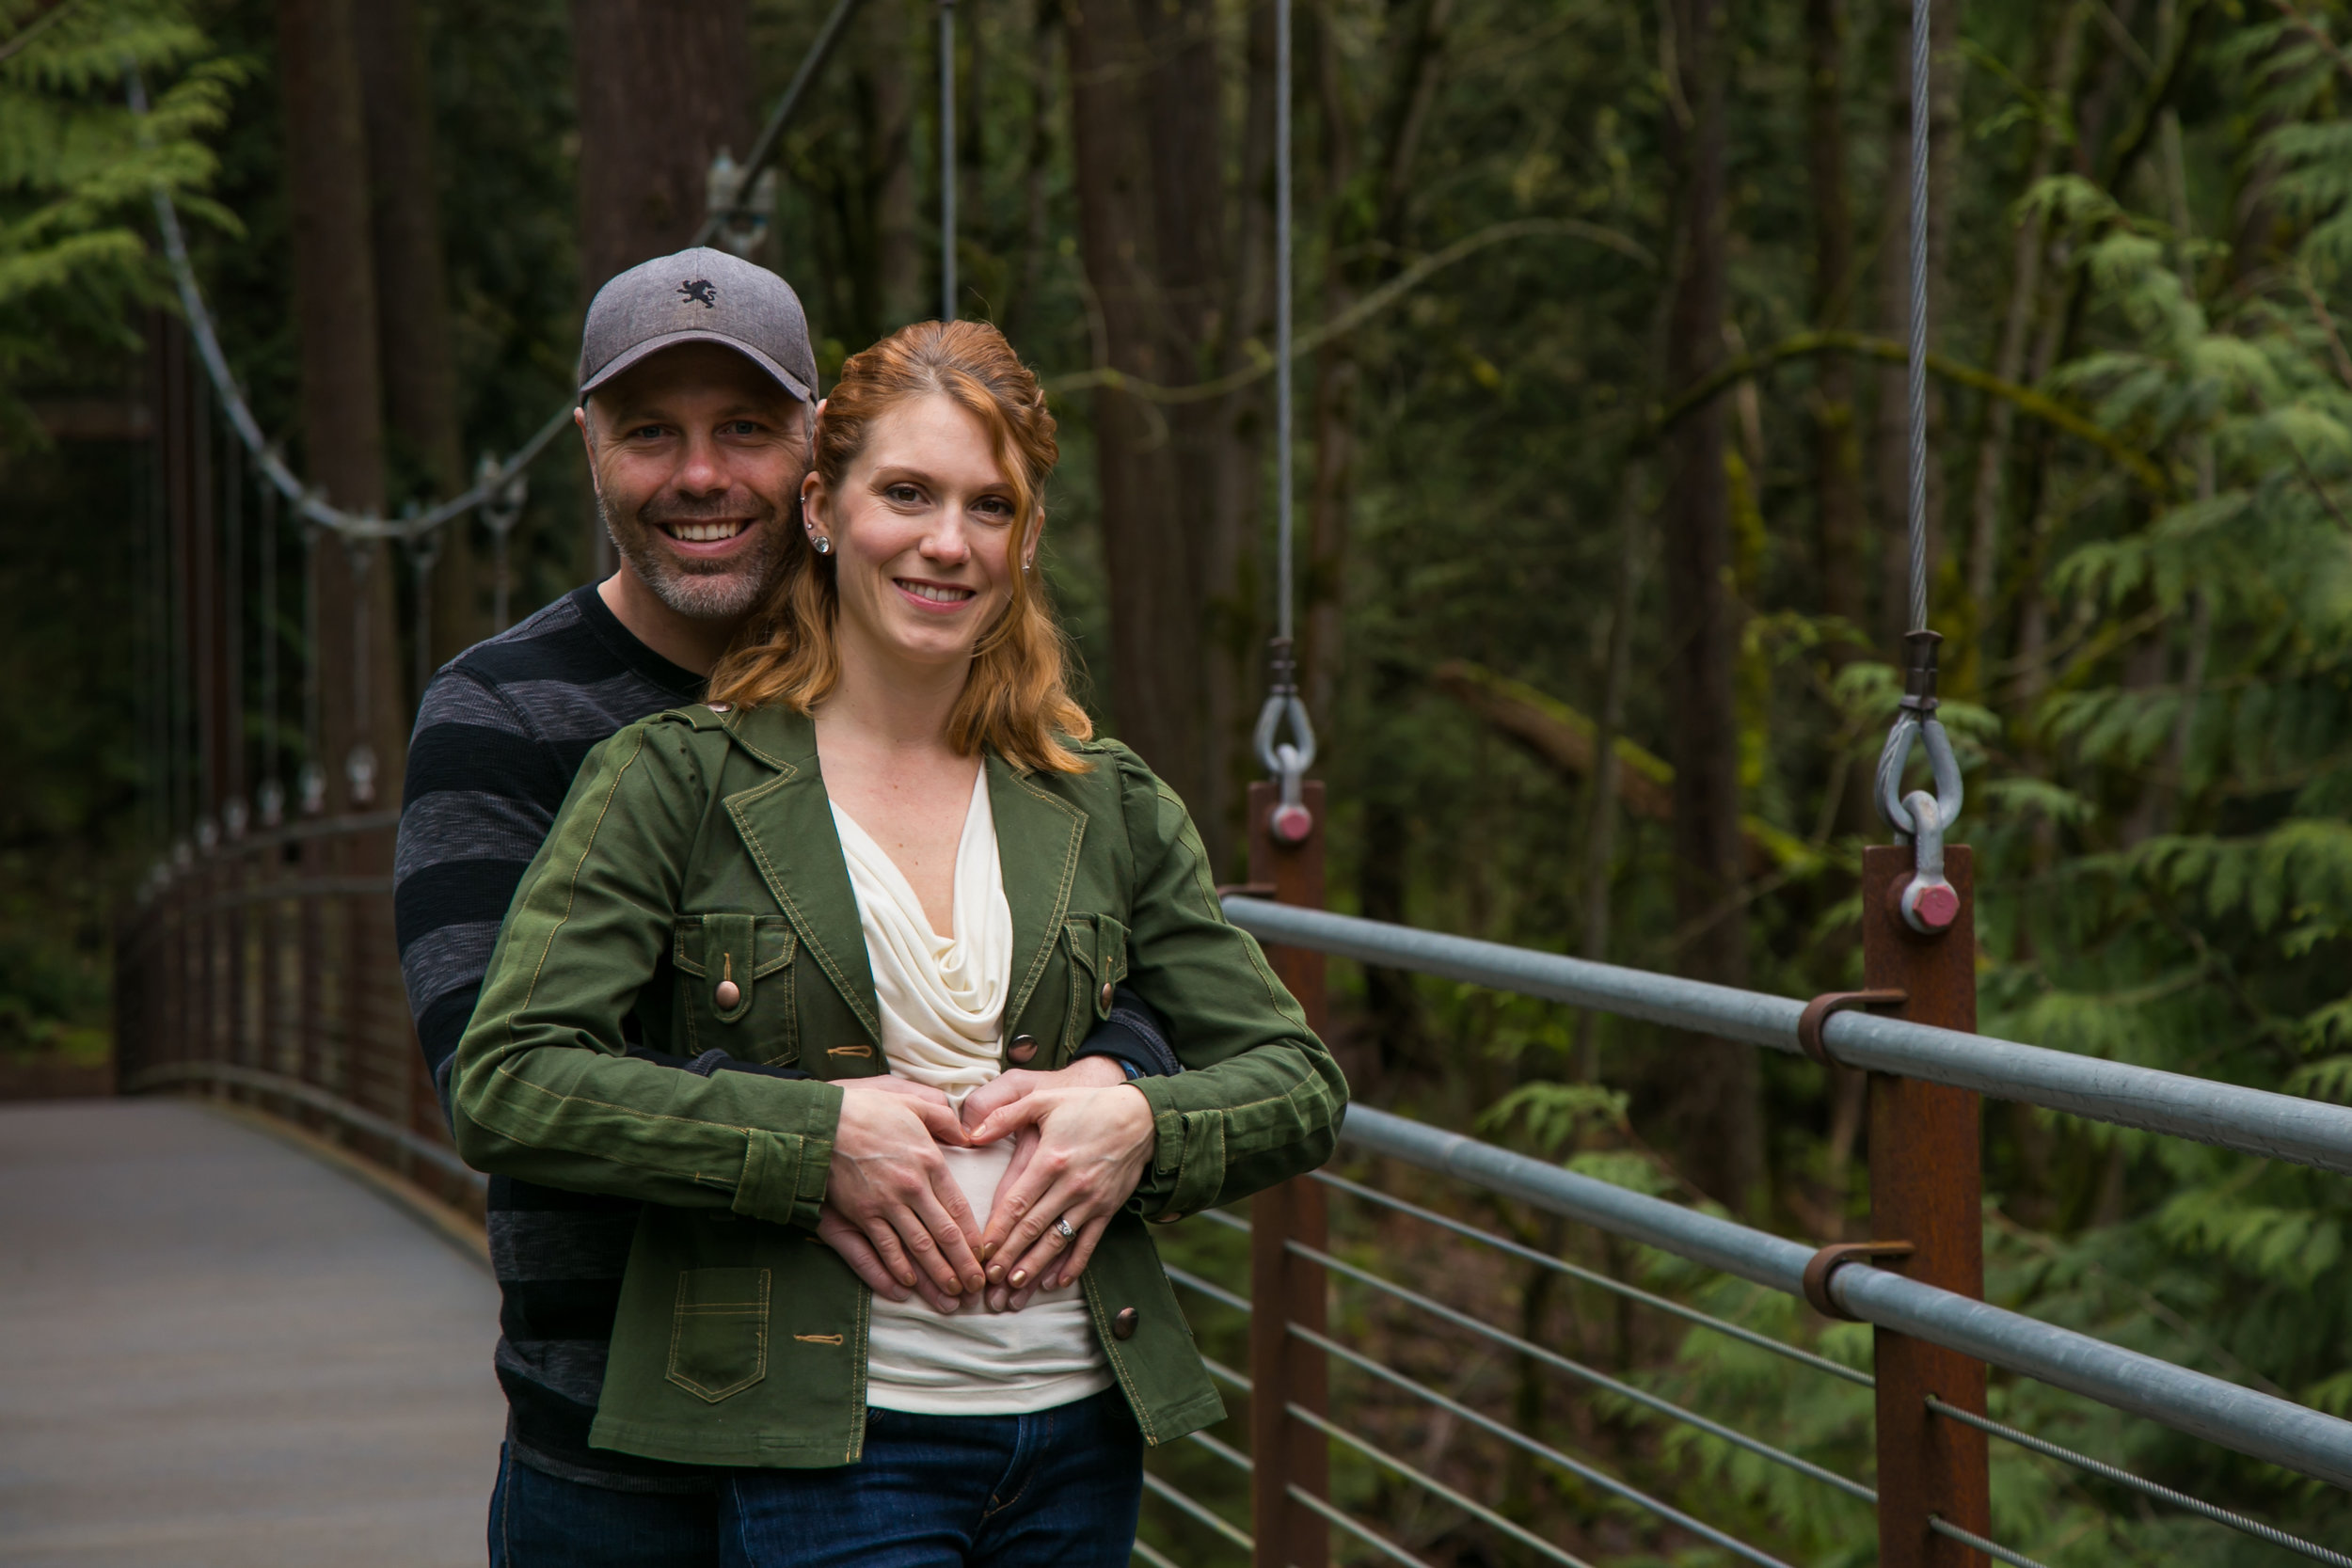 Seattle Family Photographer | G. Lin Photography | Couple standing on bridge smiling at camera